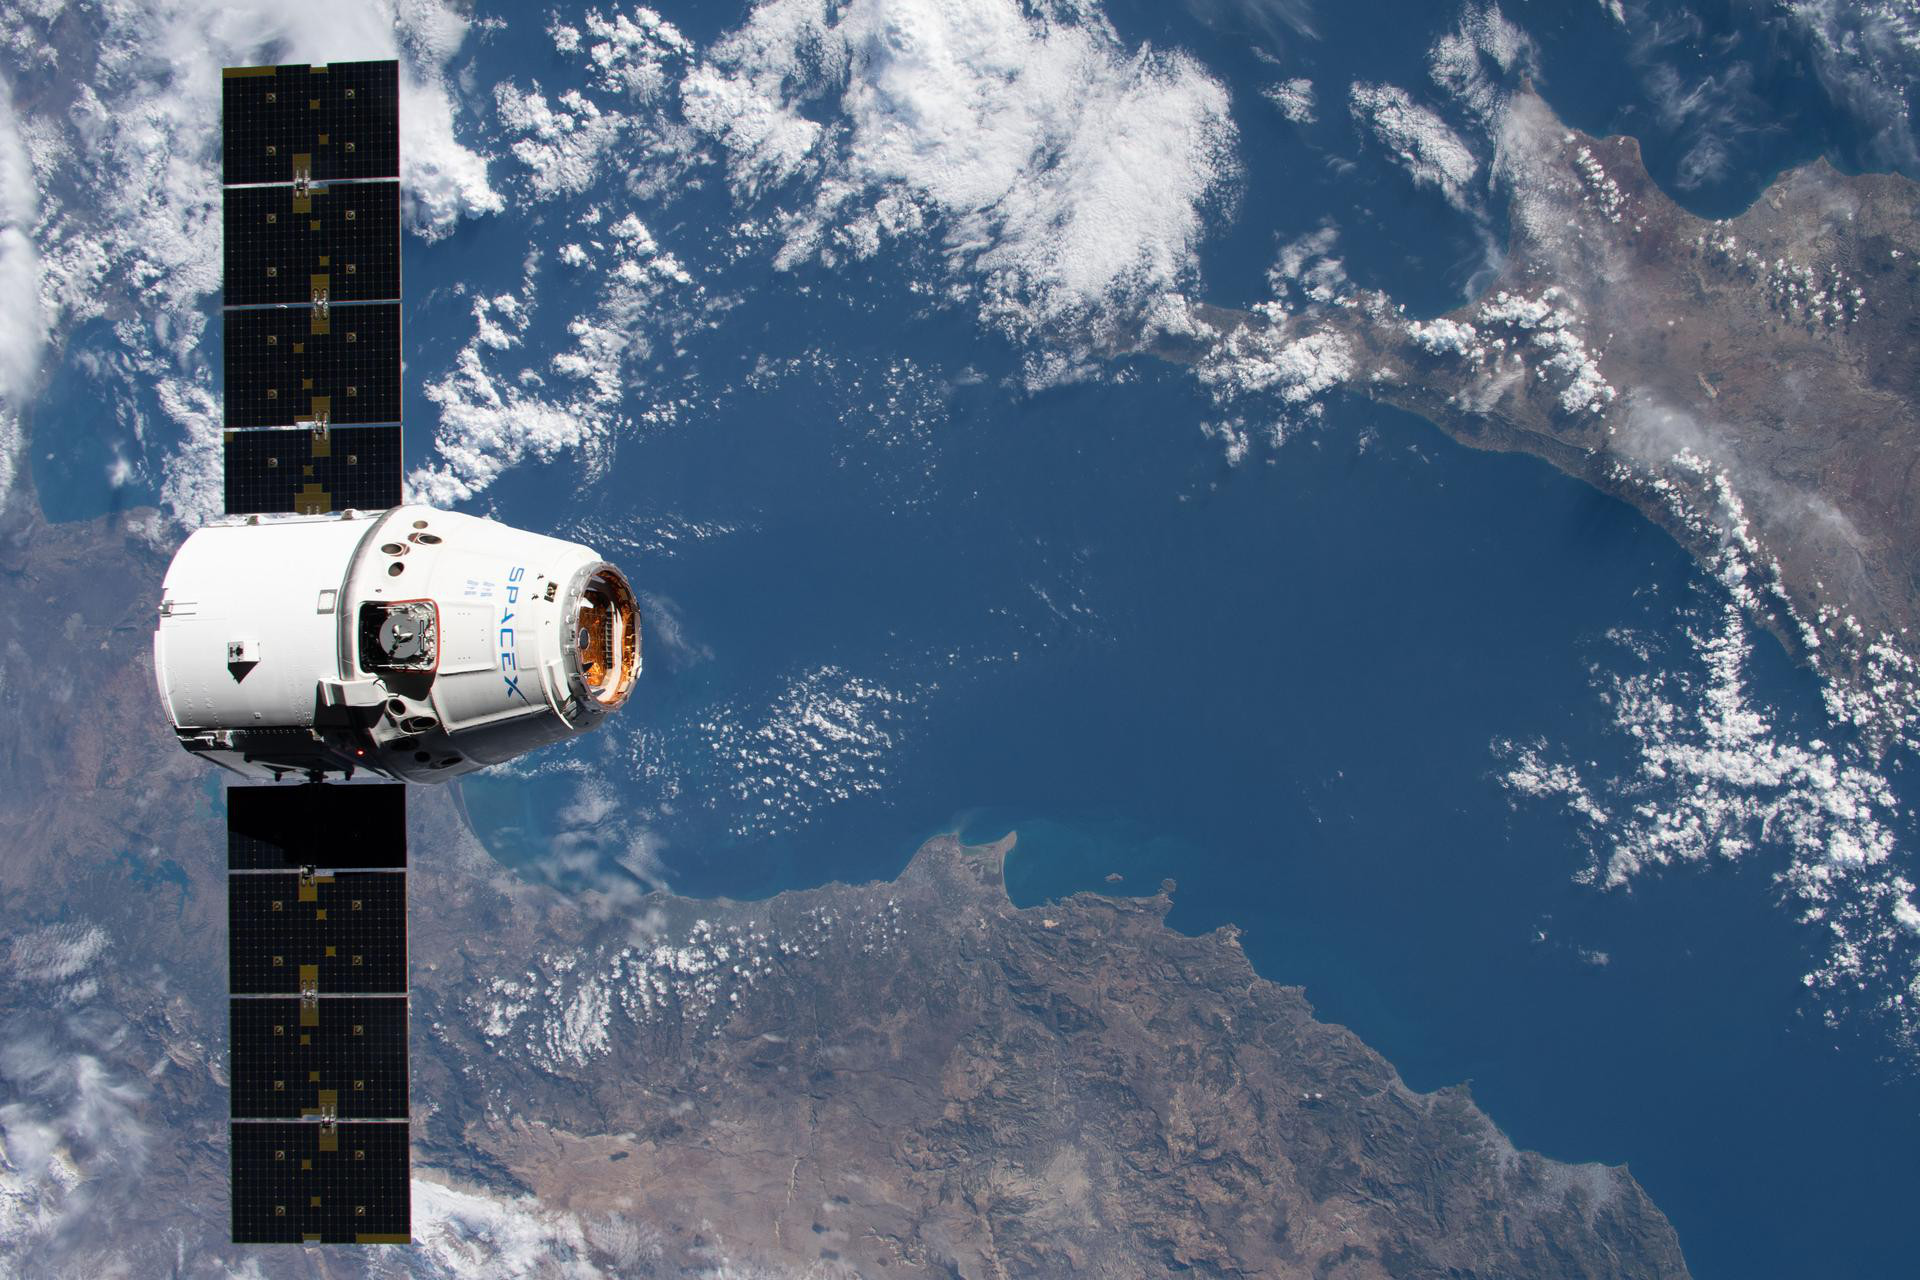 Image: The SpaceX Dragon approaches the International Space Station as both spacecraft orbit above the Mediterranean Sea in between Turkey and Cyprus. Credit: NASA